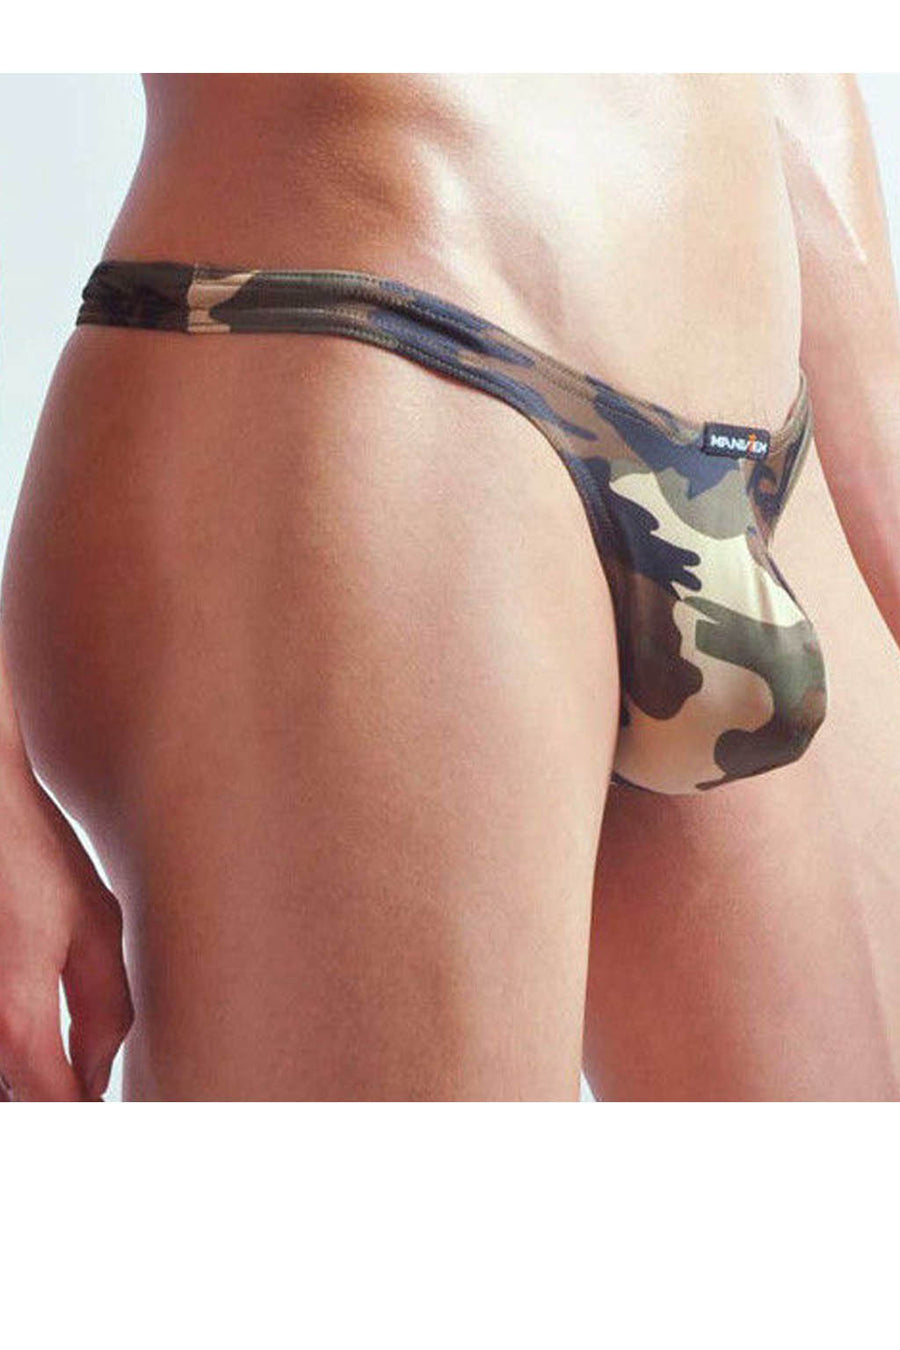 Manview Camouflage Pouch Thong Lowrise Underwear